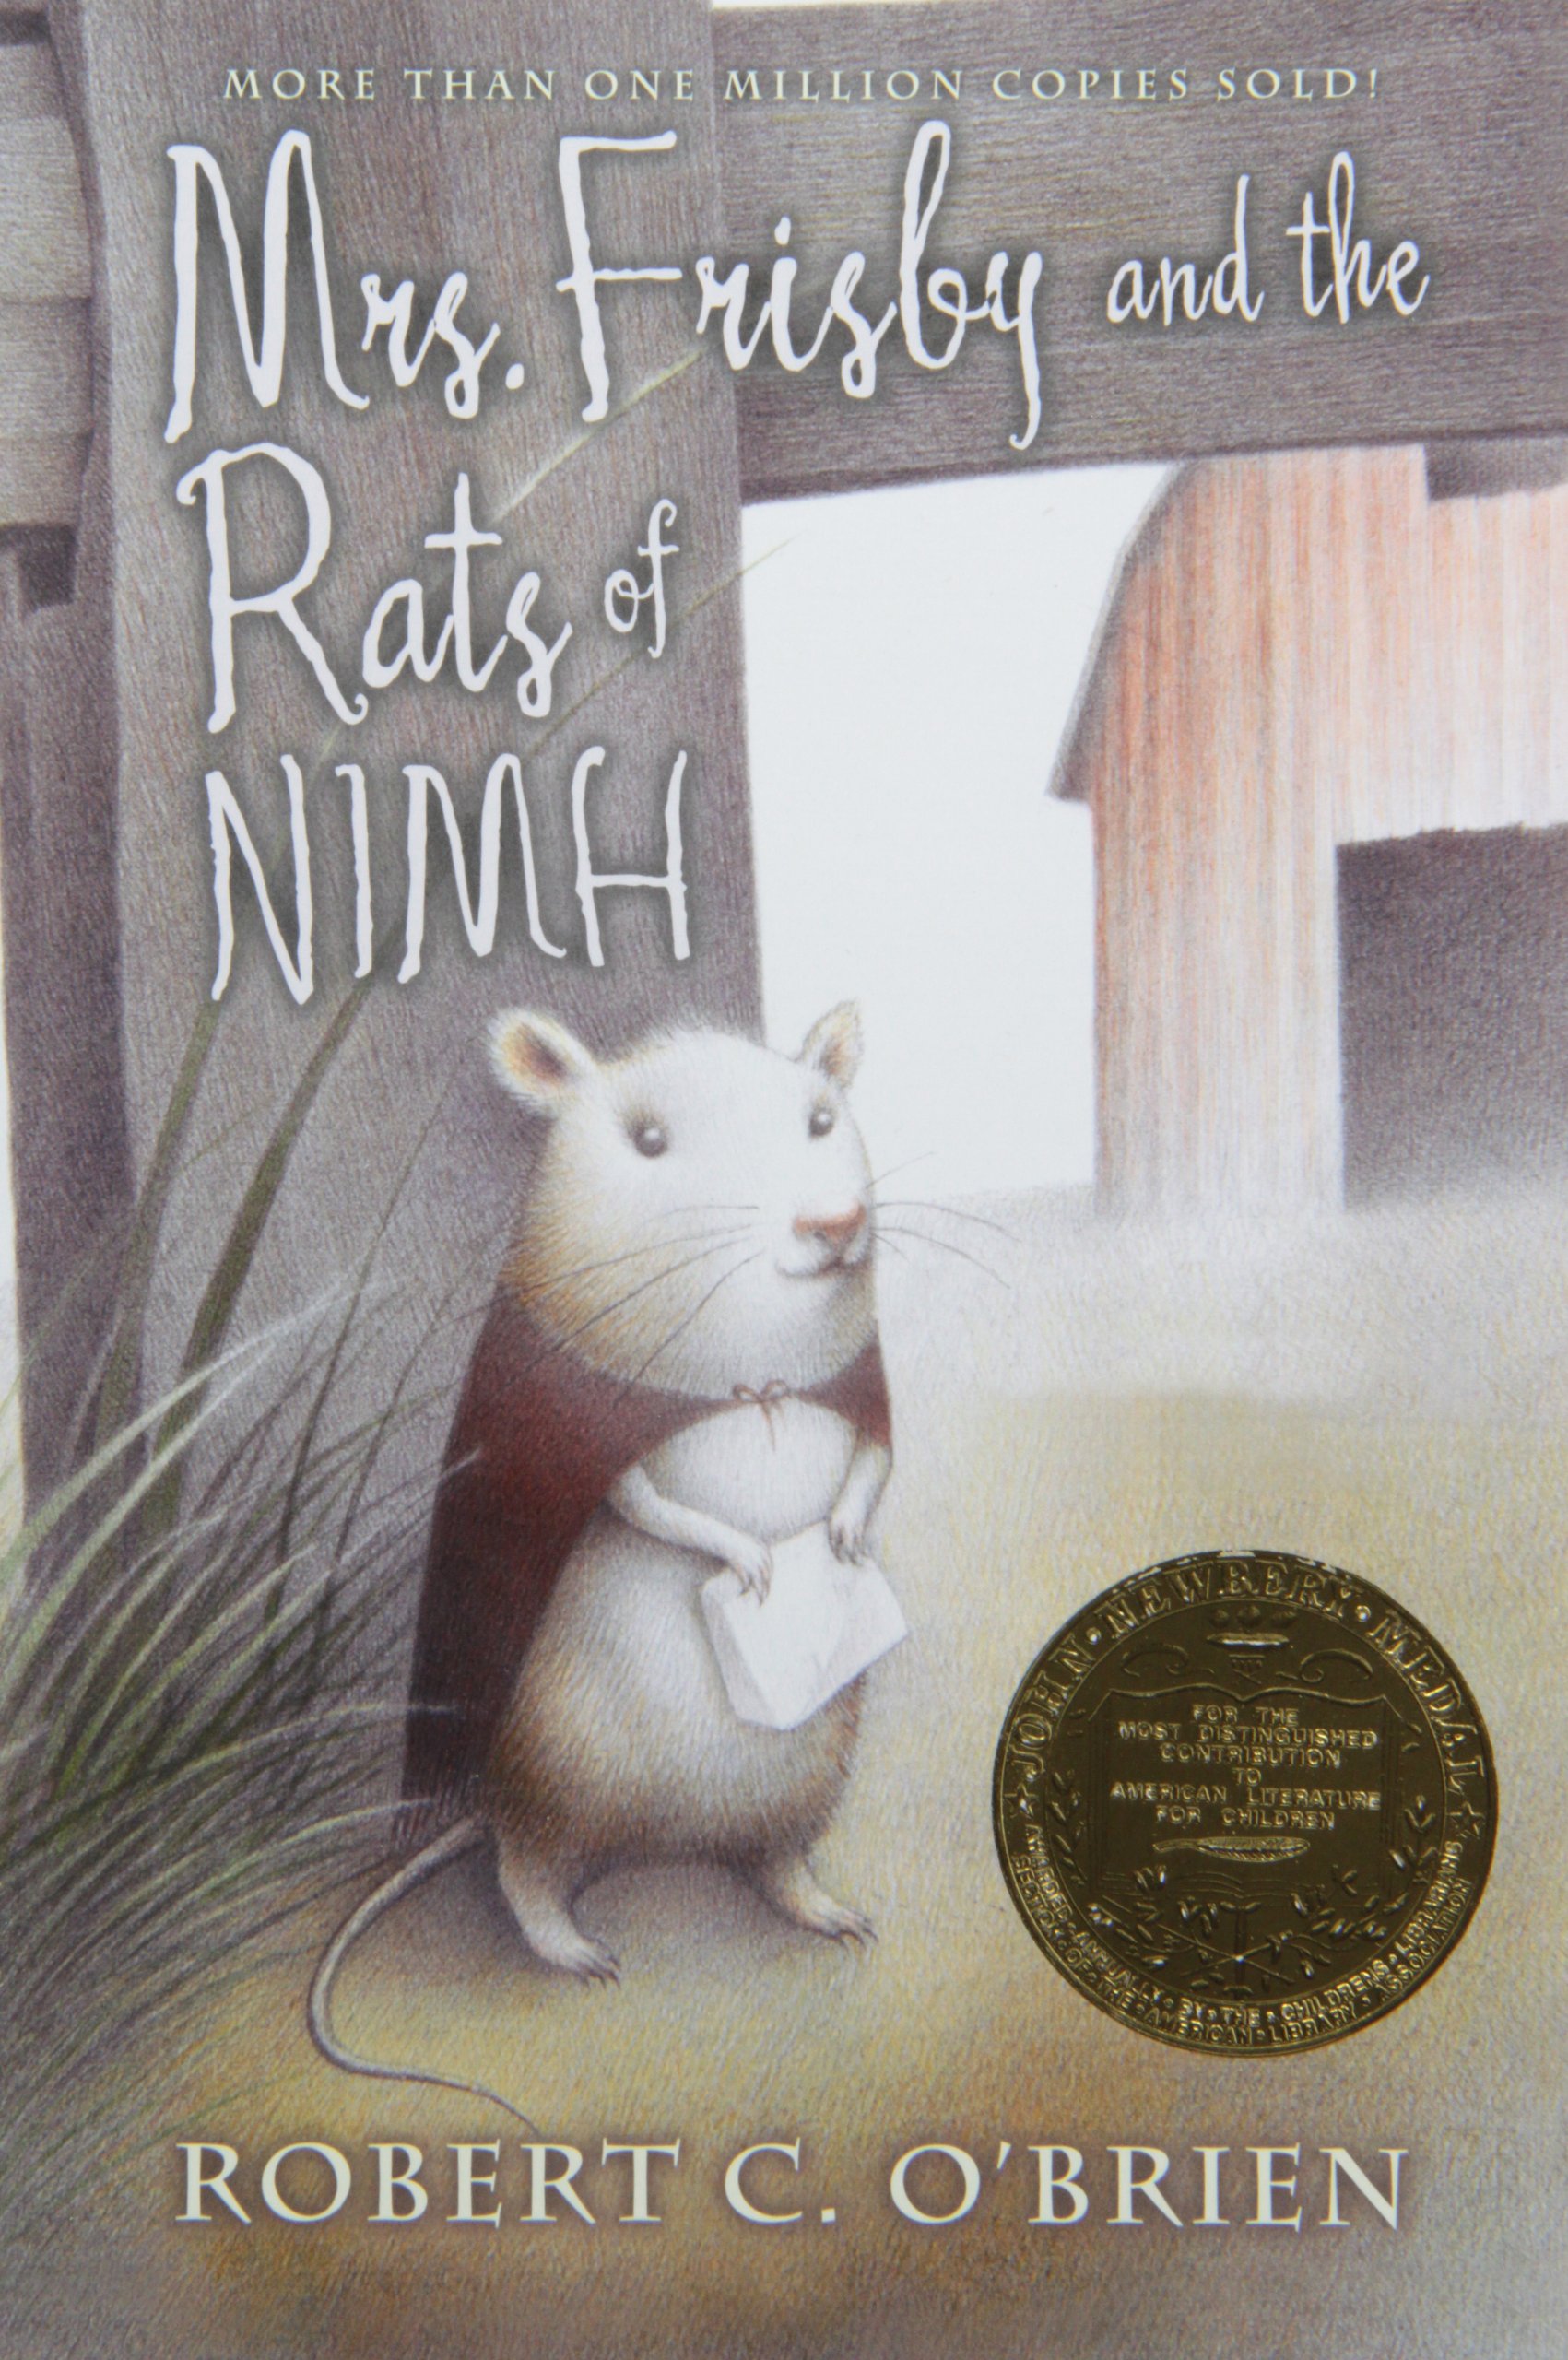 mrs-frisby-rats-nimh-cover